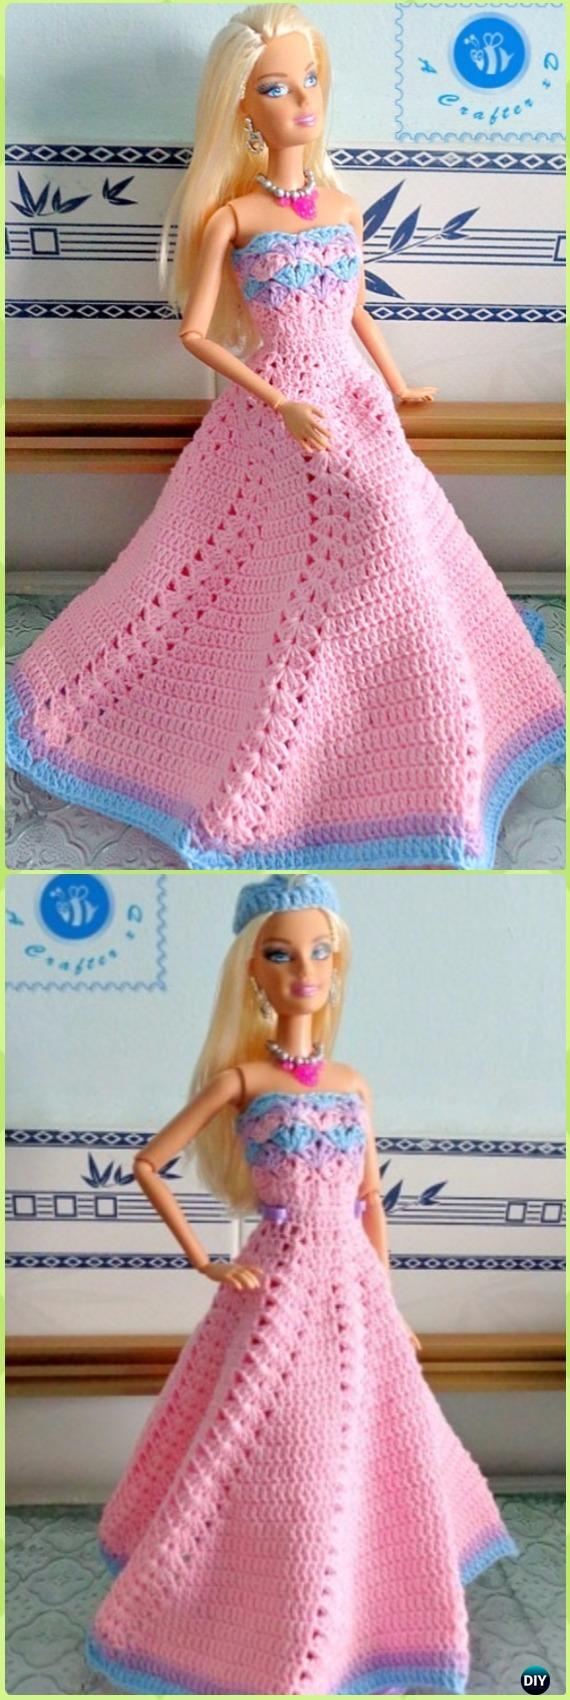 Crochet Doll Dress Patterns For Barbies Crochet Barbie Fashion Doll Clothes Outfits Free Patterns